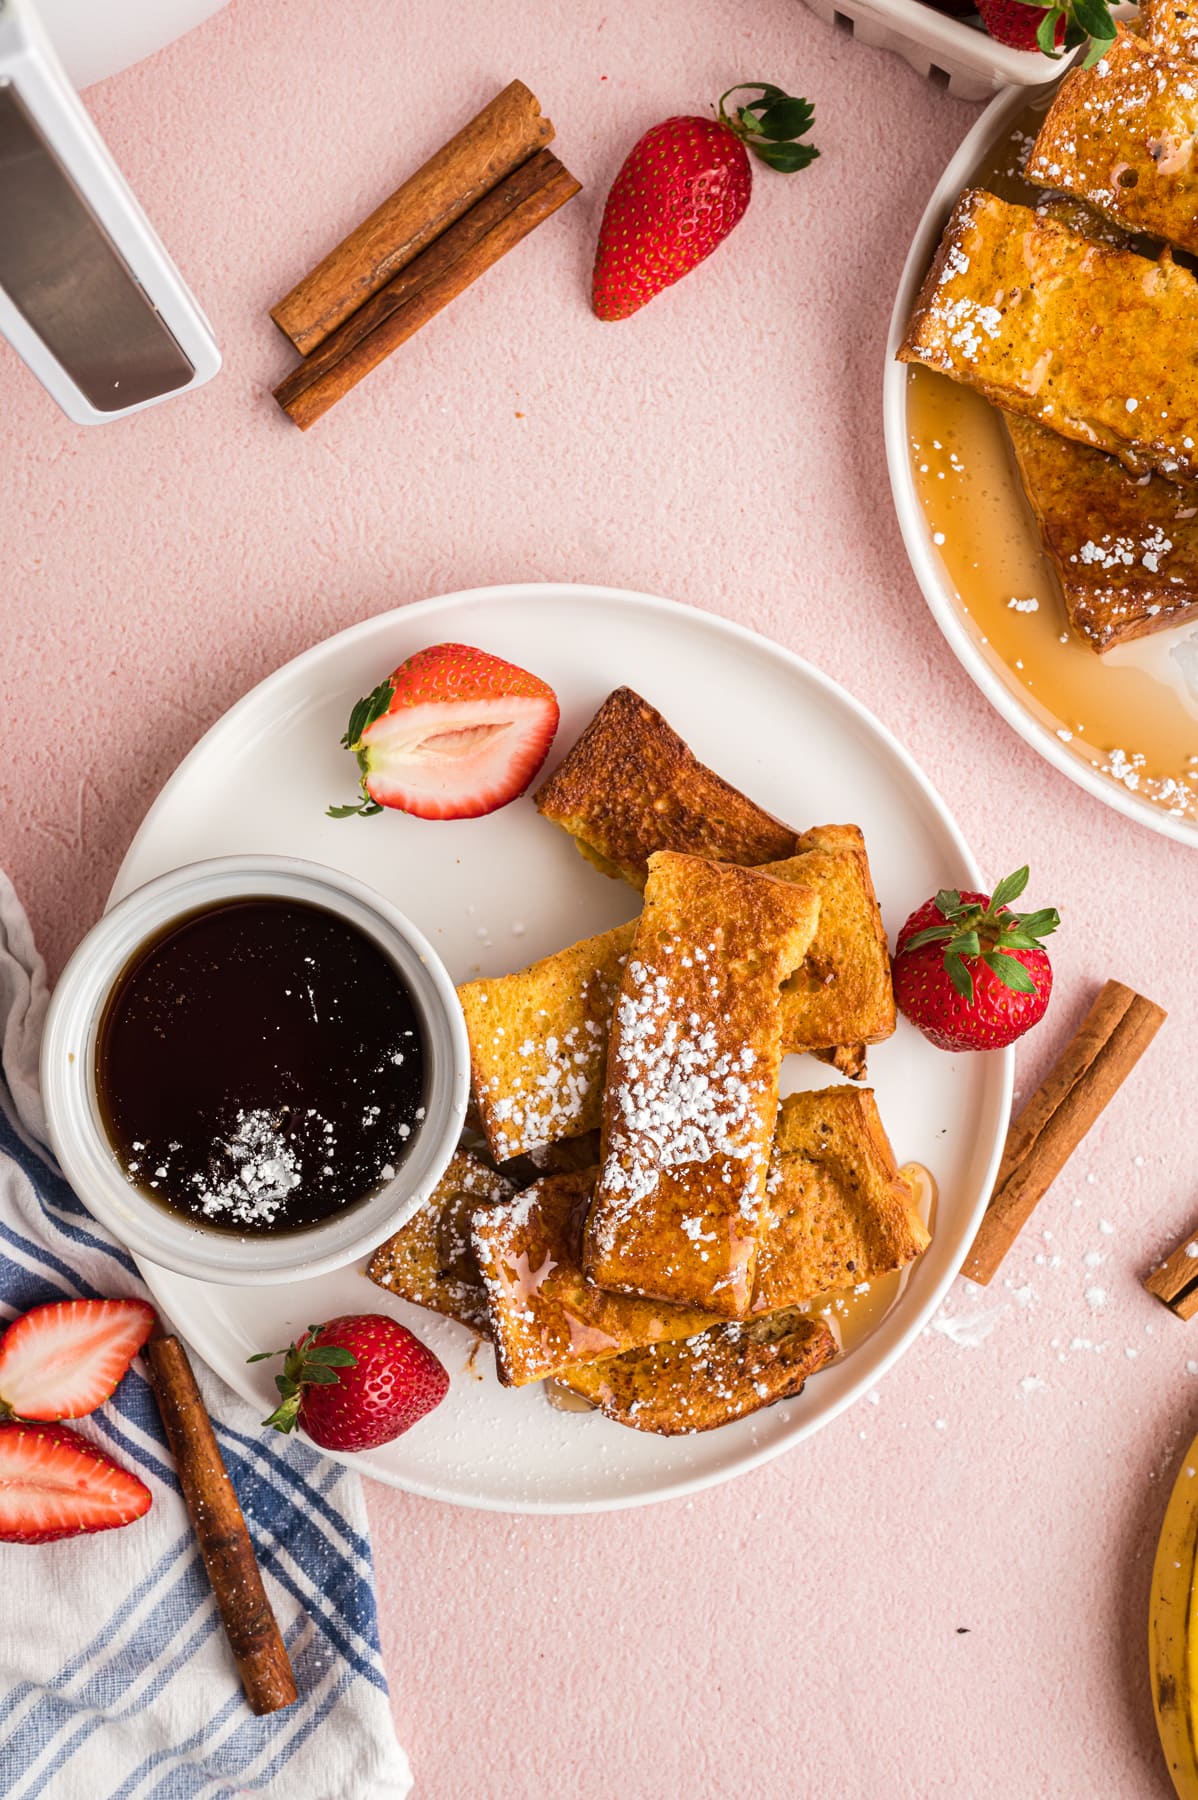 Overhead view of a plate of homemade French toast sticks with syrup